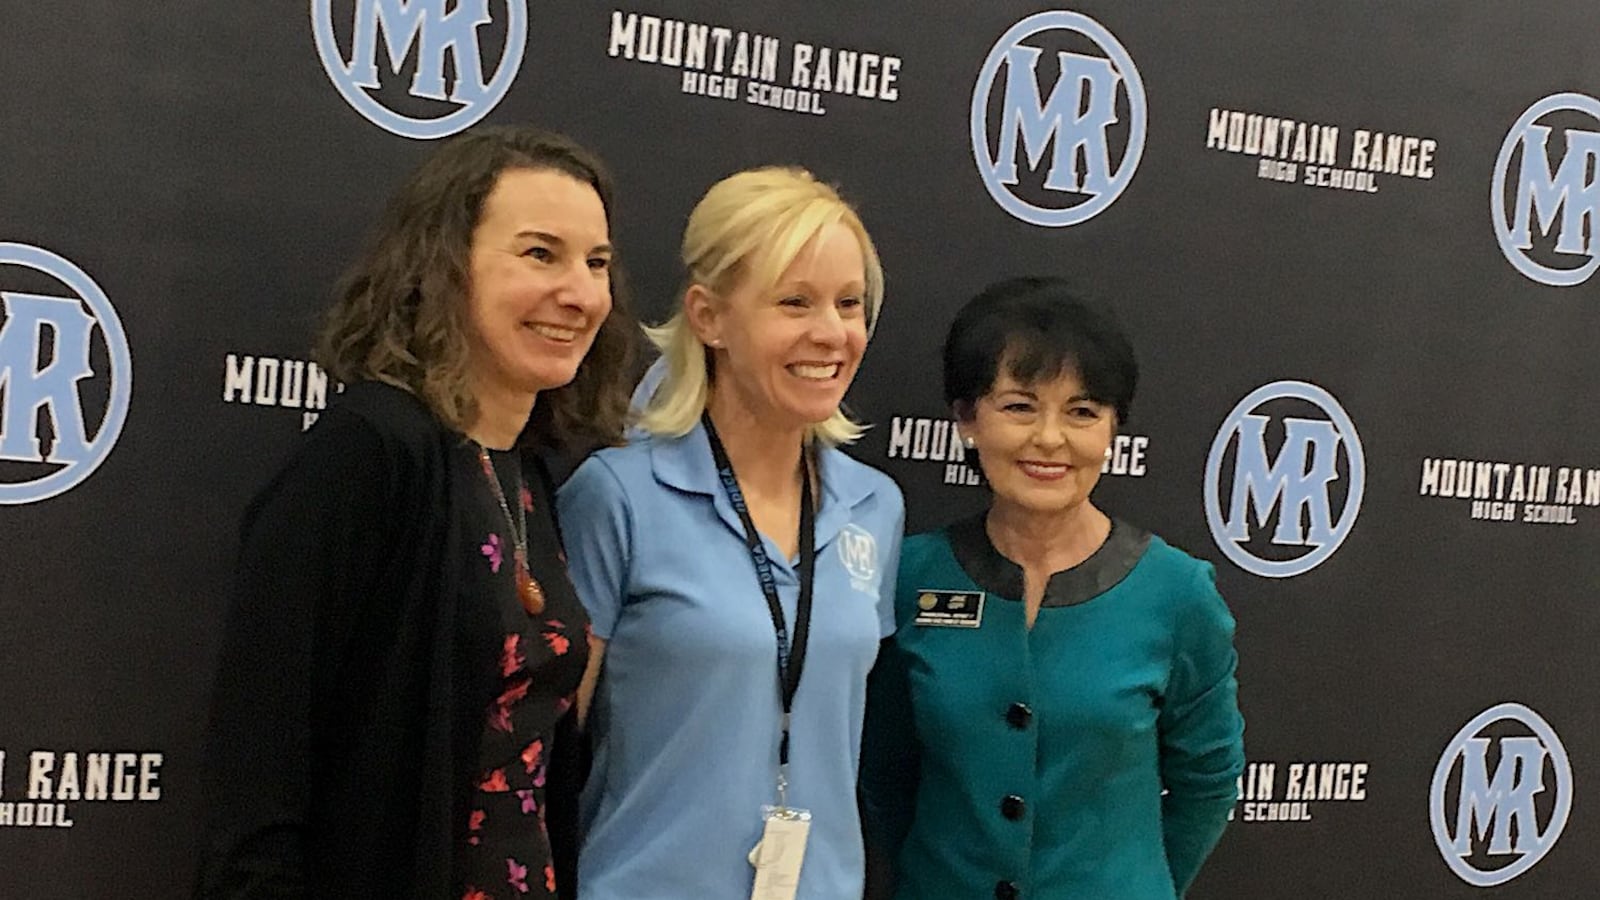 Hilary Wimmer, Colorado's 2020 Teacher of the Year, stands between State Education Commissioner Katy Anthes, left, and Jane Goff, a member of the state board of education.